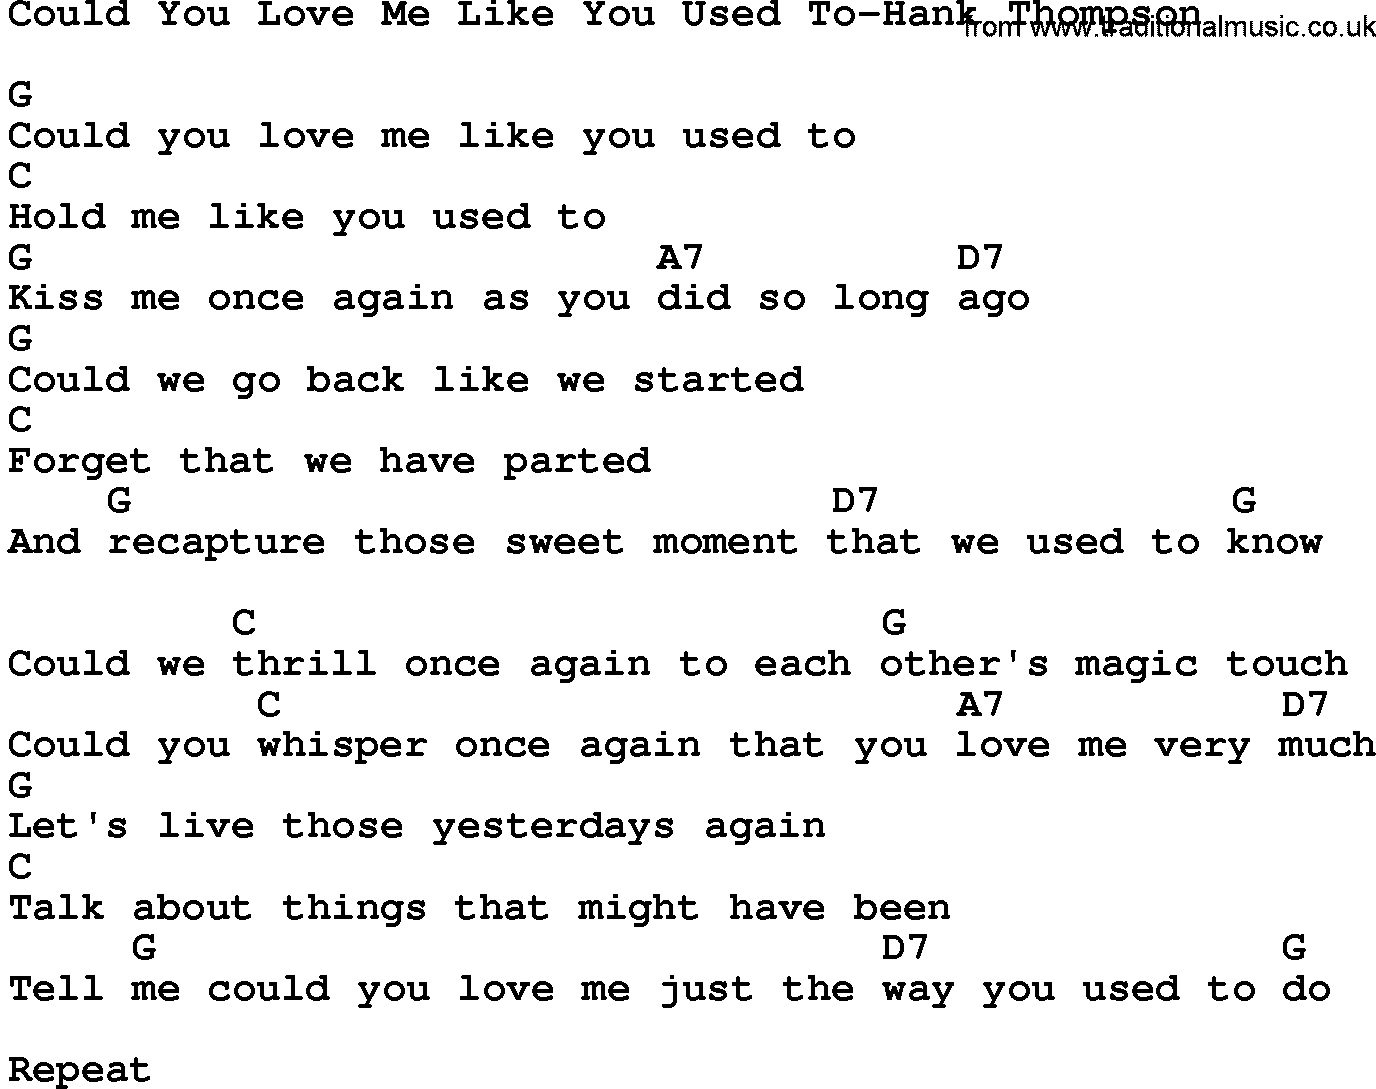 Country music song: Could You Love Me Like You Used To-Hank Thompson lyrics and chords